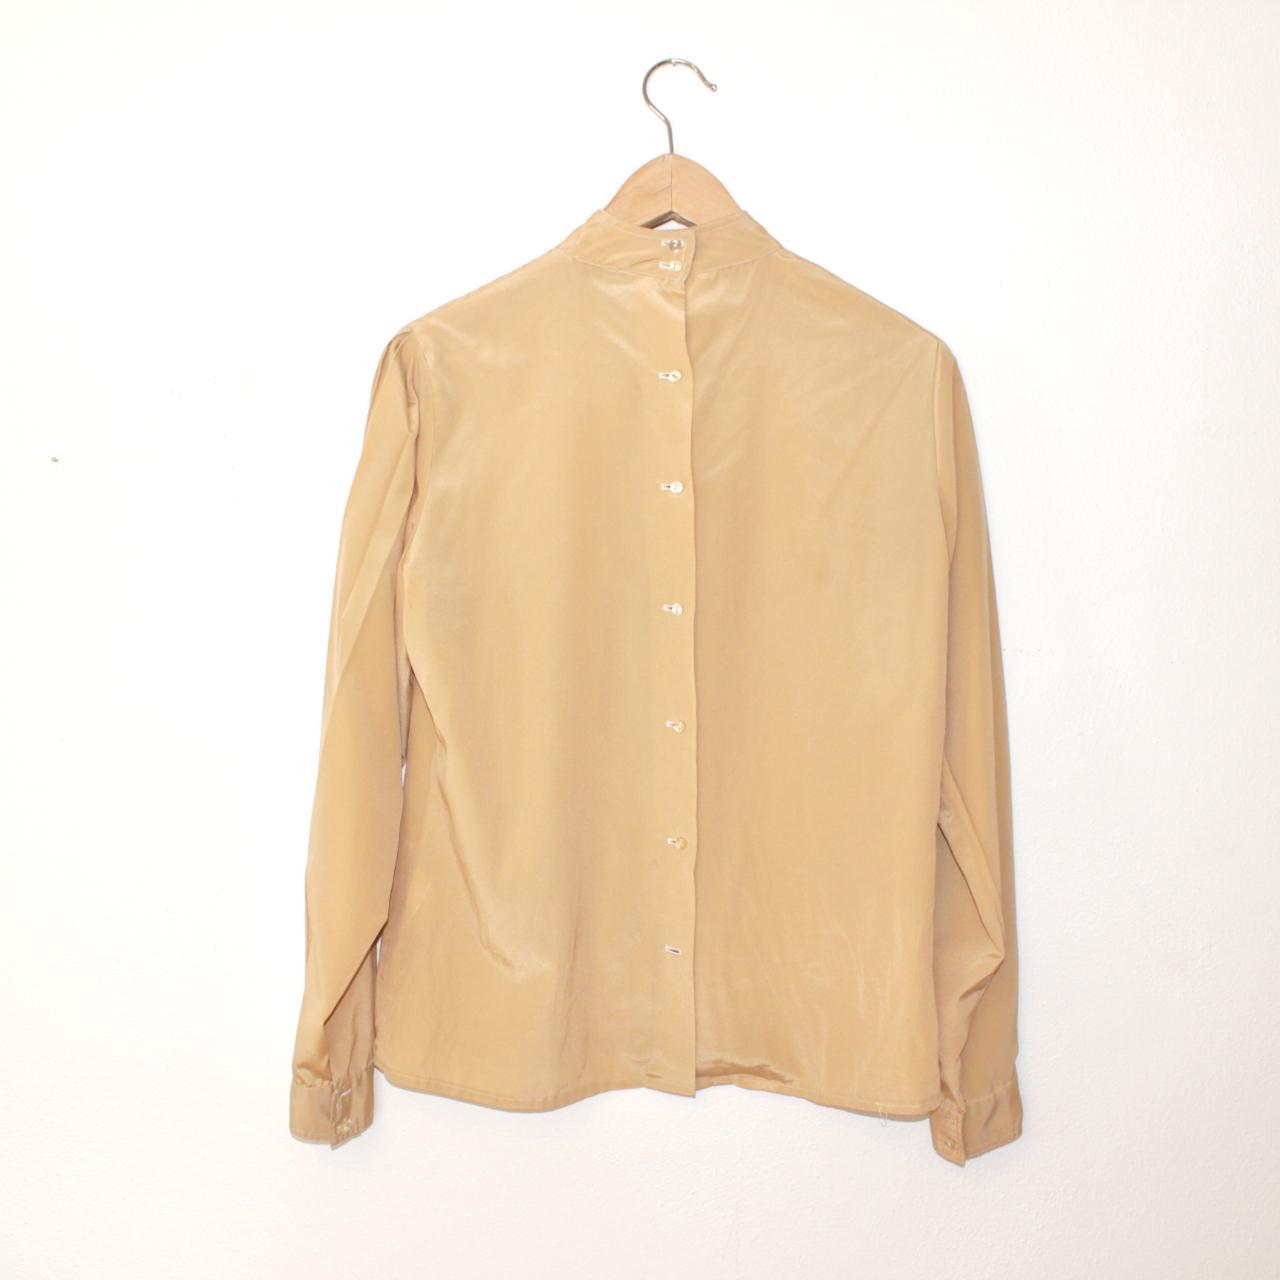 Women's Tan and Gold Blouse | Depop